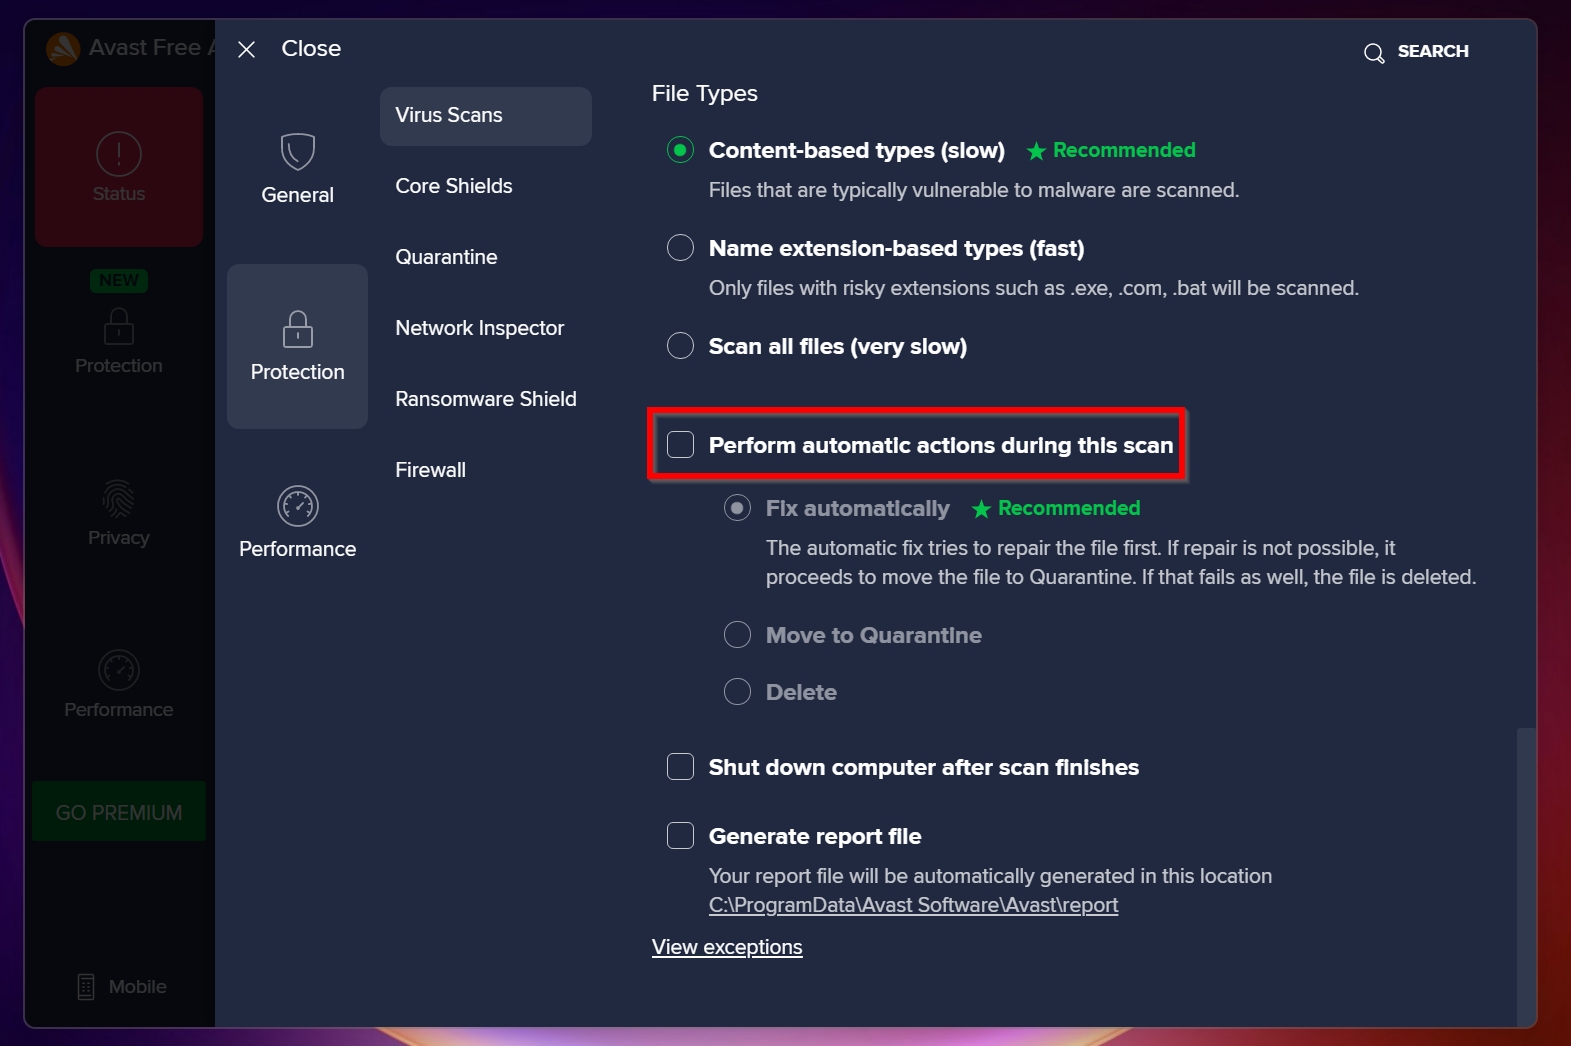 Automatic actions performed when Avast detects a virus during a scan.